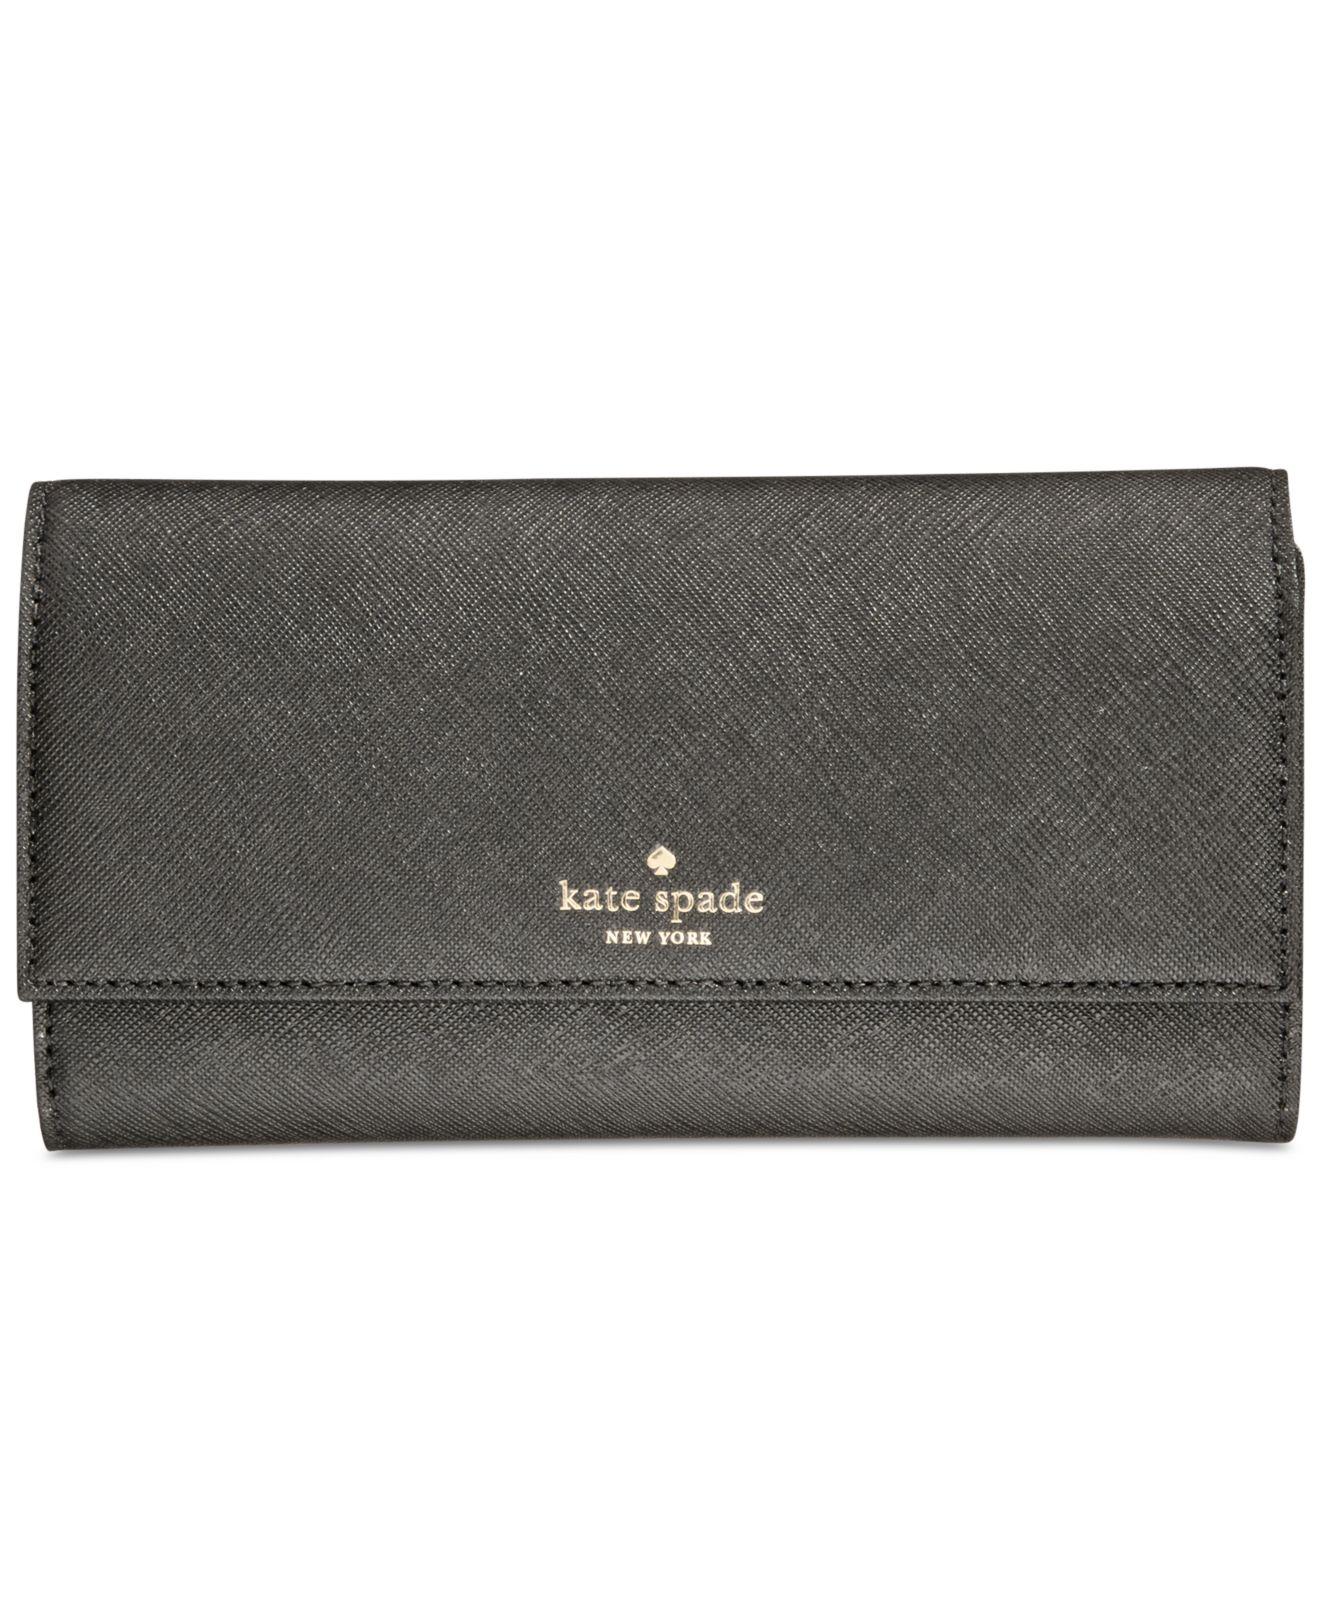 Kate Spade Phone Saffiano Leather Wallet in Black/Gold (Black) - Lyst